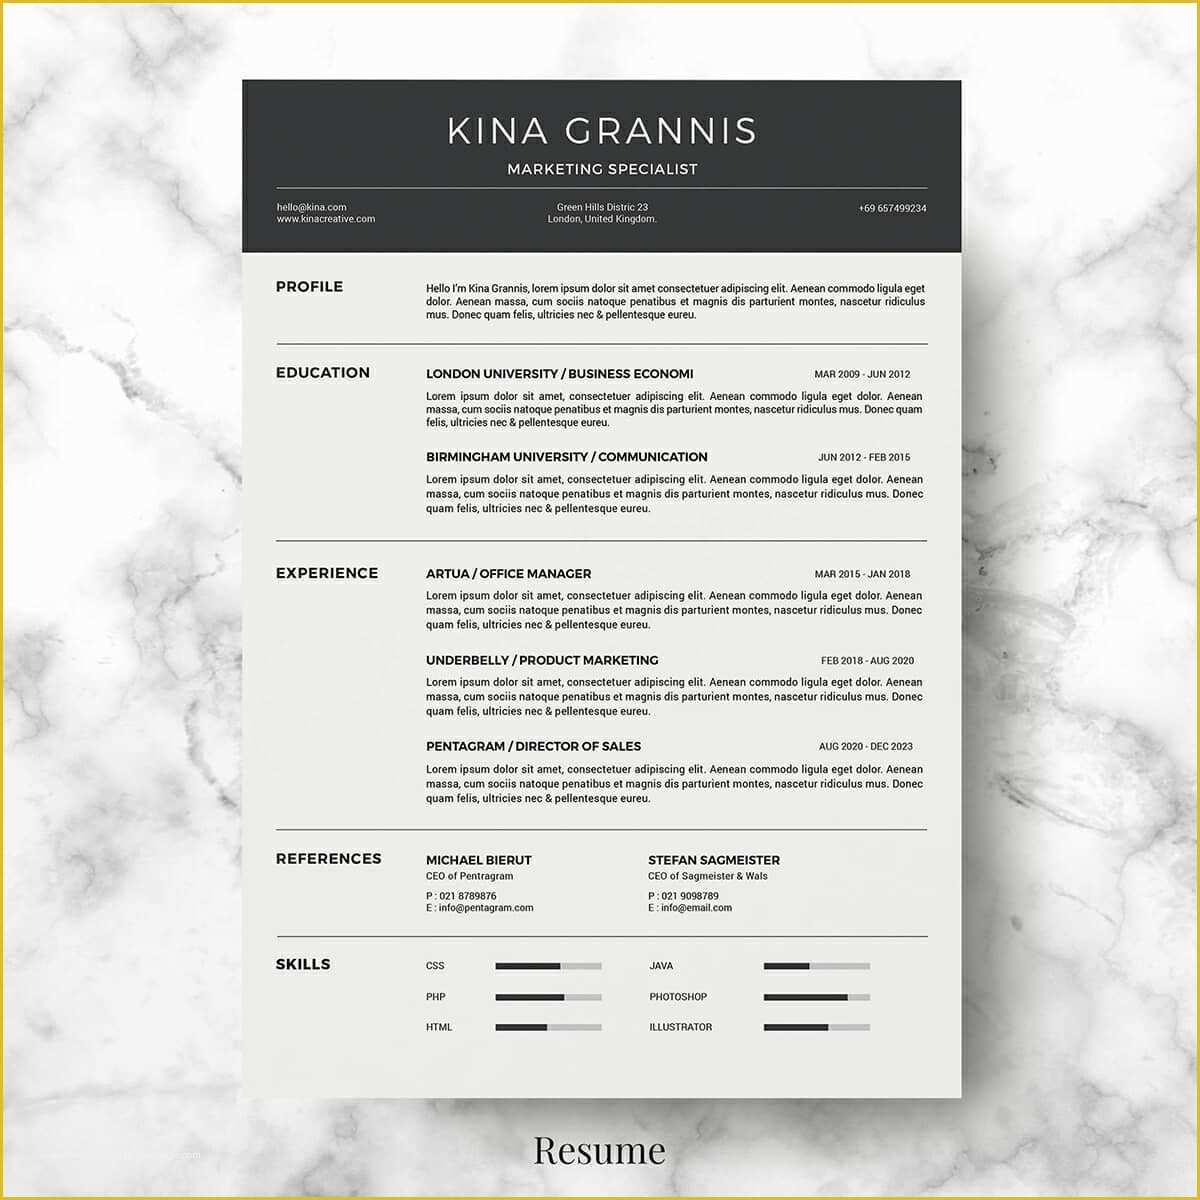 Minimalist Resume Template Free Download Of 15 Minimalist Resume Templates to Download & Use Free